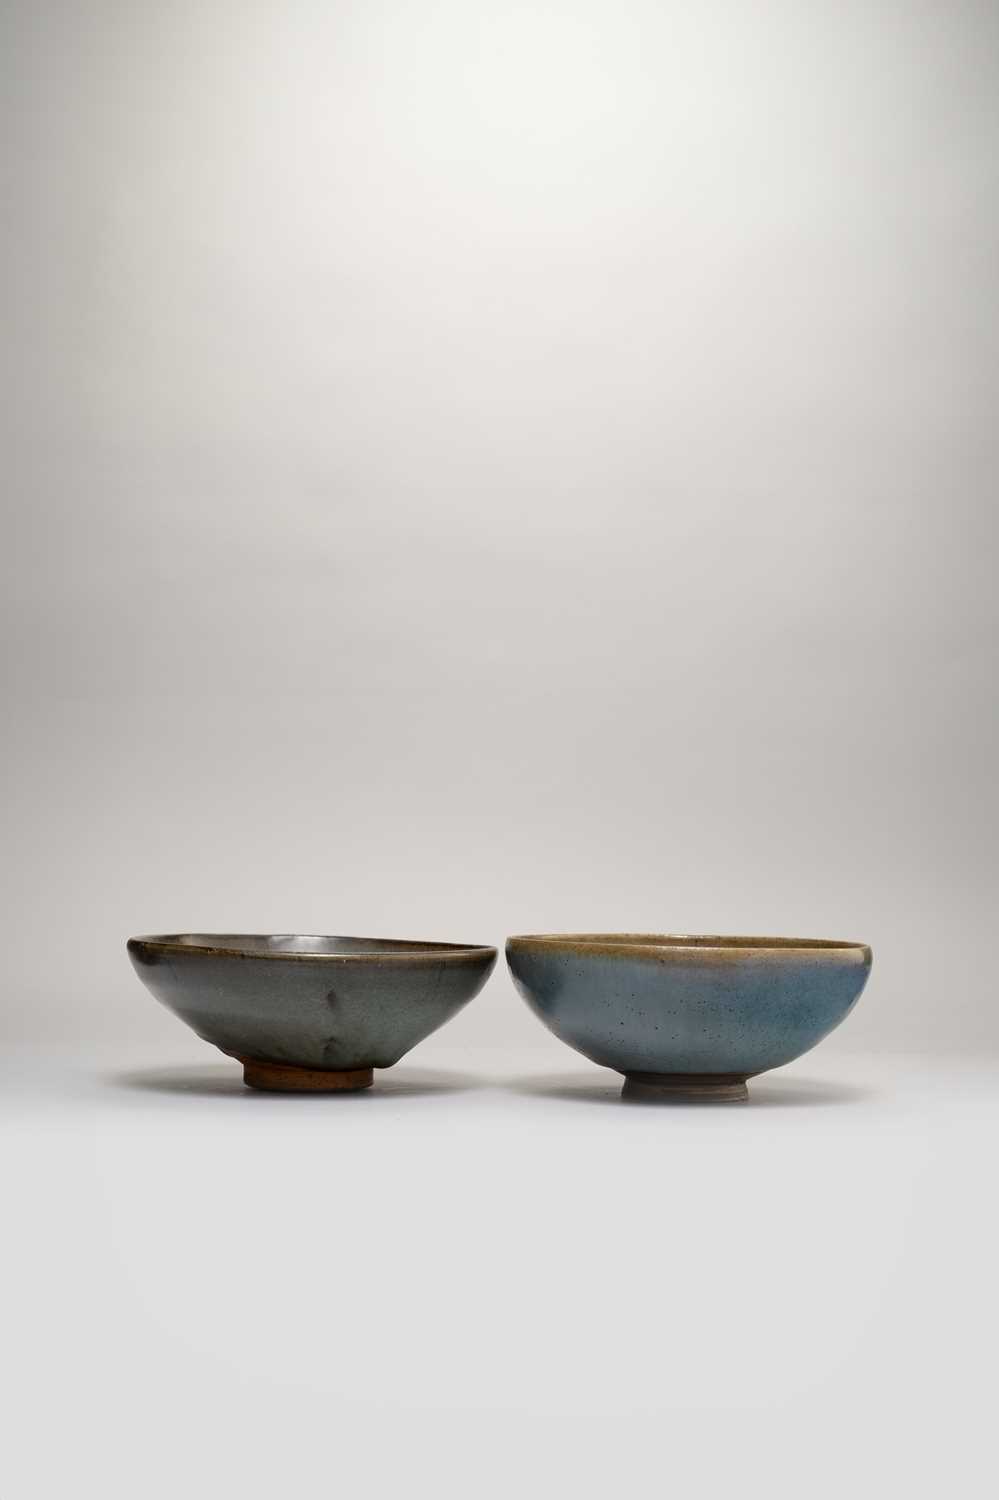 NO RESERVE TWO CHINESE JUN-TYPE BOWLS PROBABLY QING DYNASTY Each coated with a creamy pale-blue